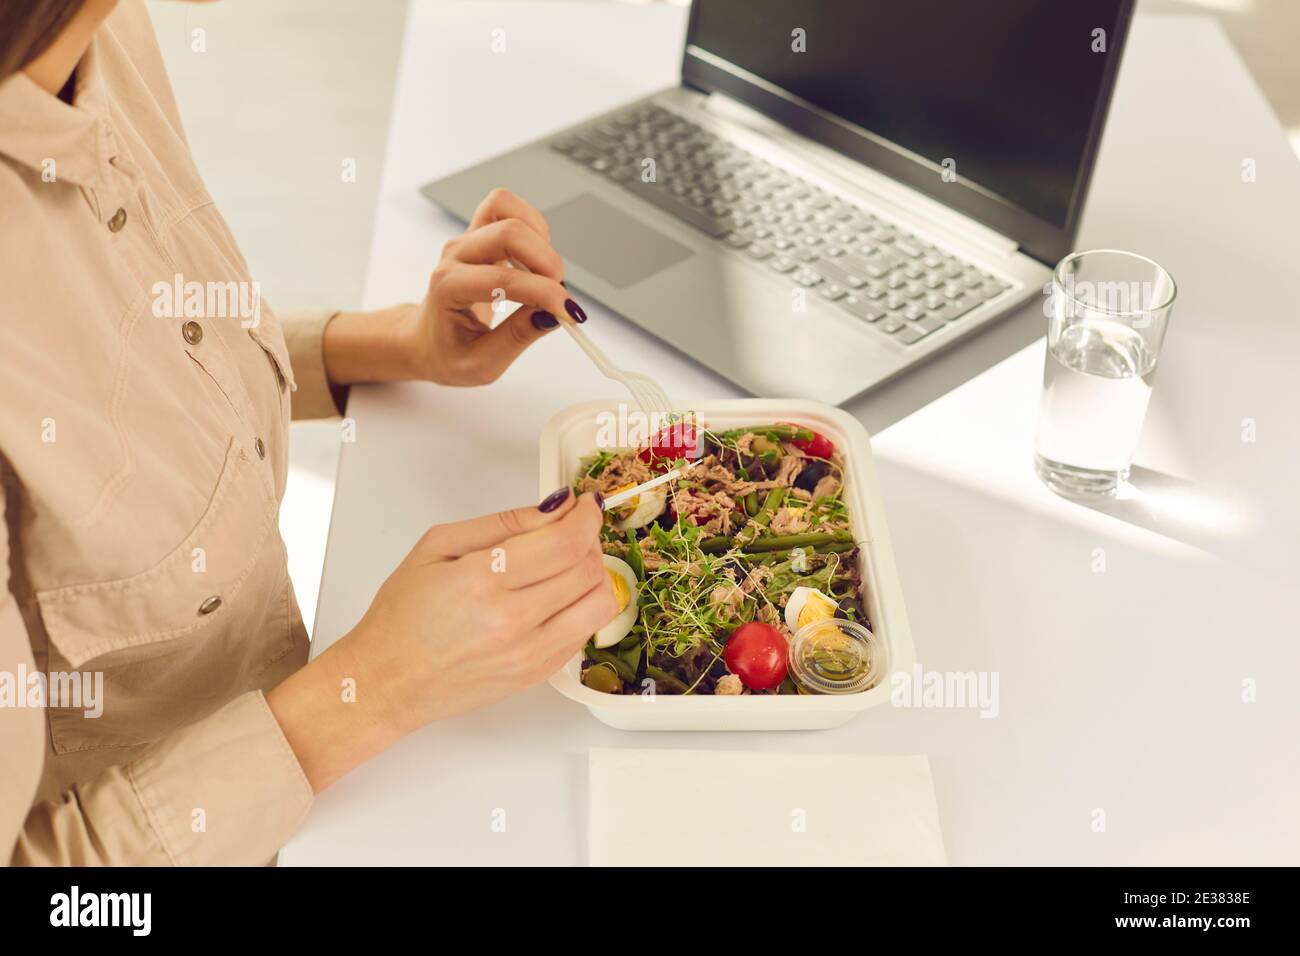 Woman office worker sitting at desk with laptop and water and enjoying healthy boxed food order Stock Photo